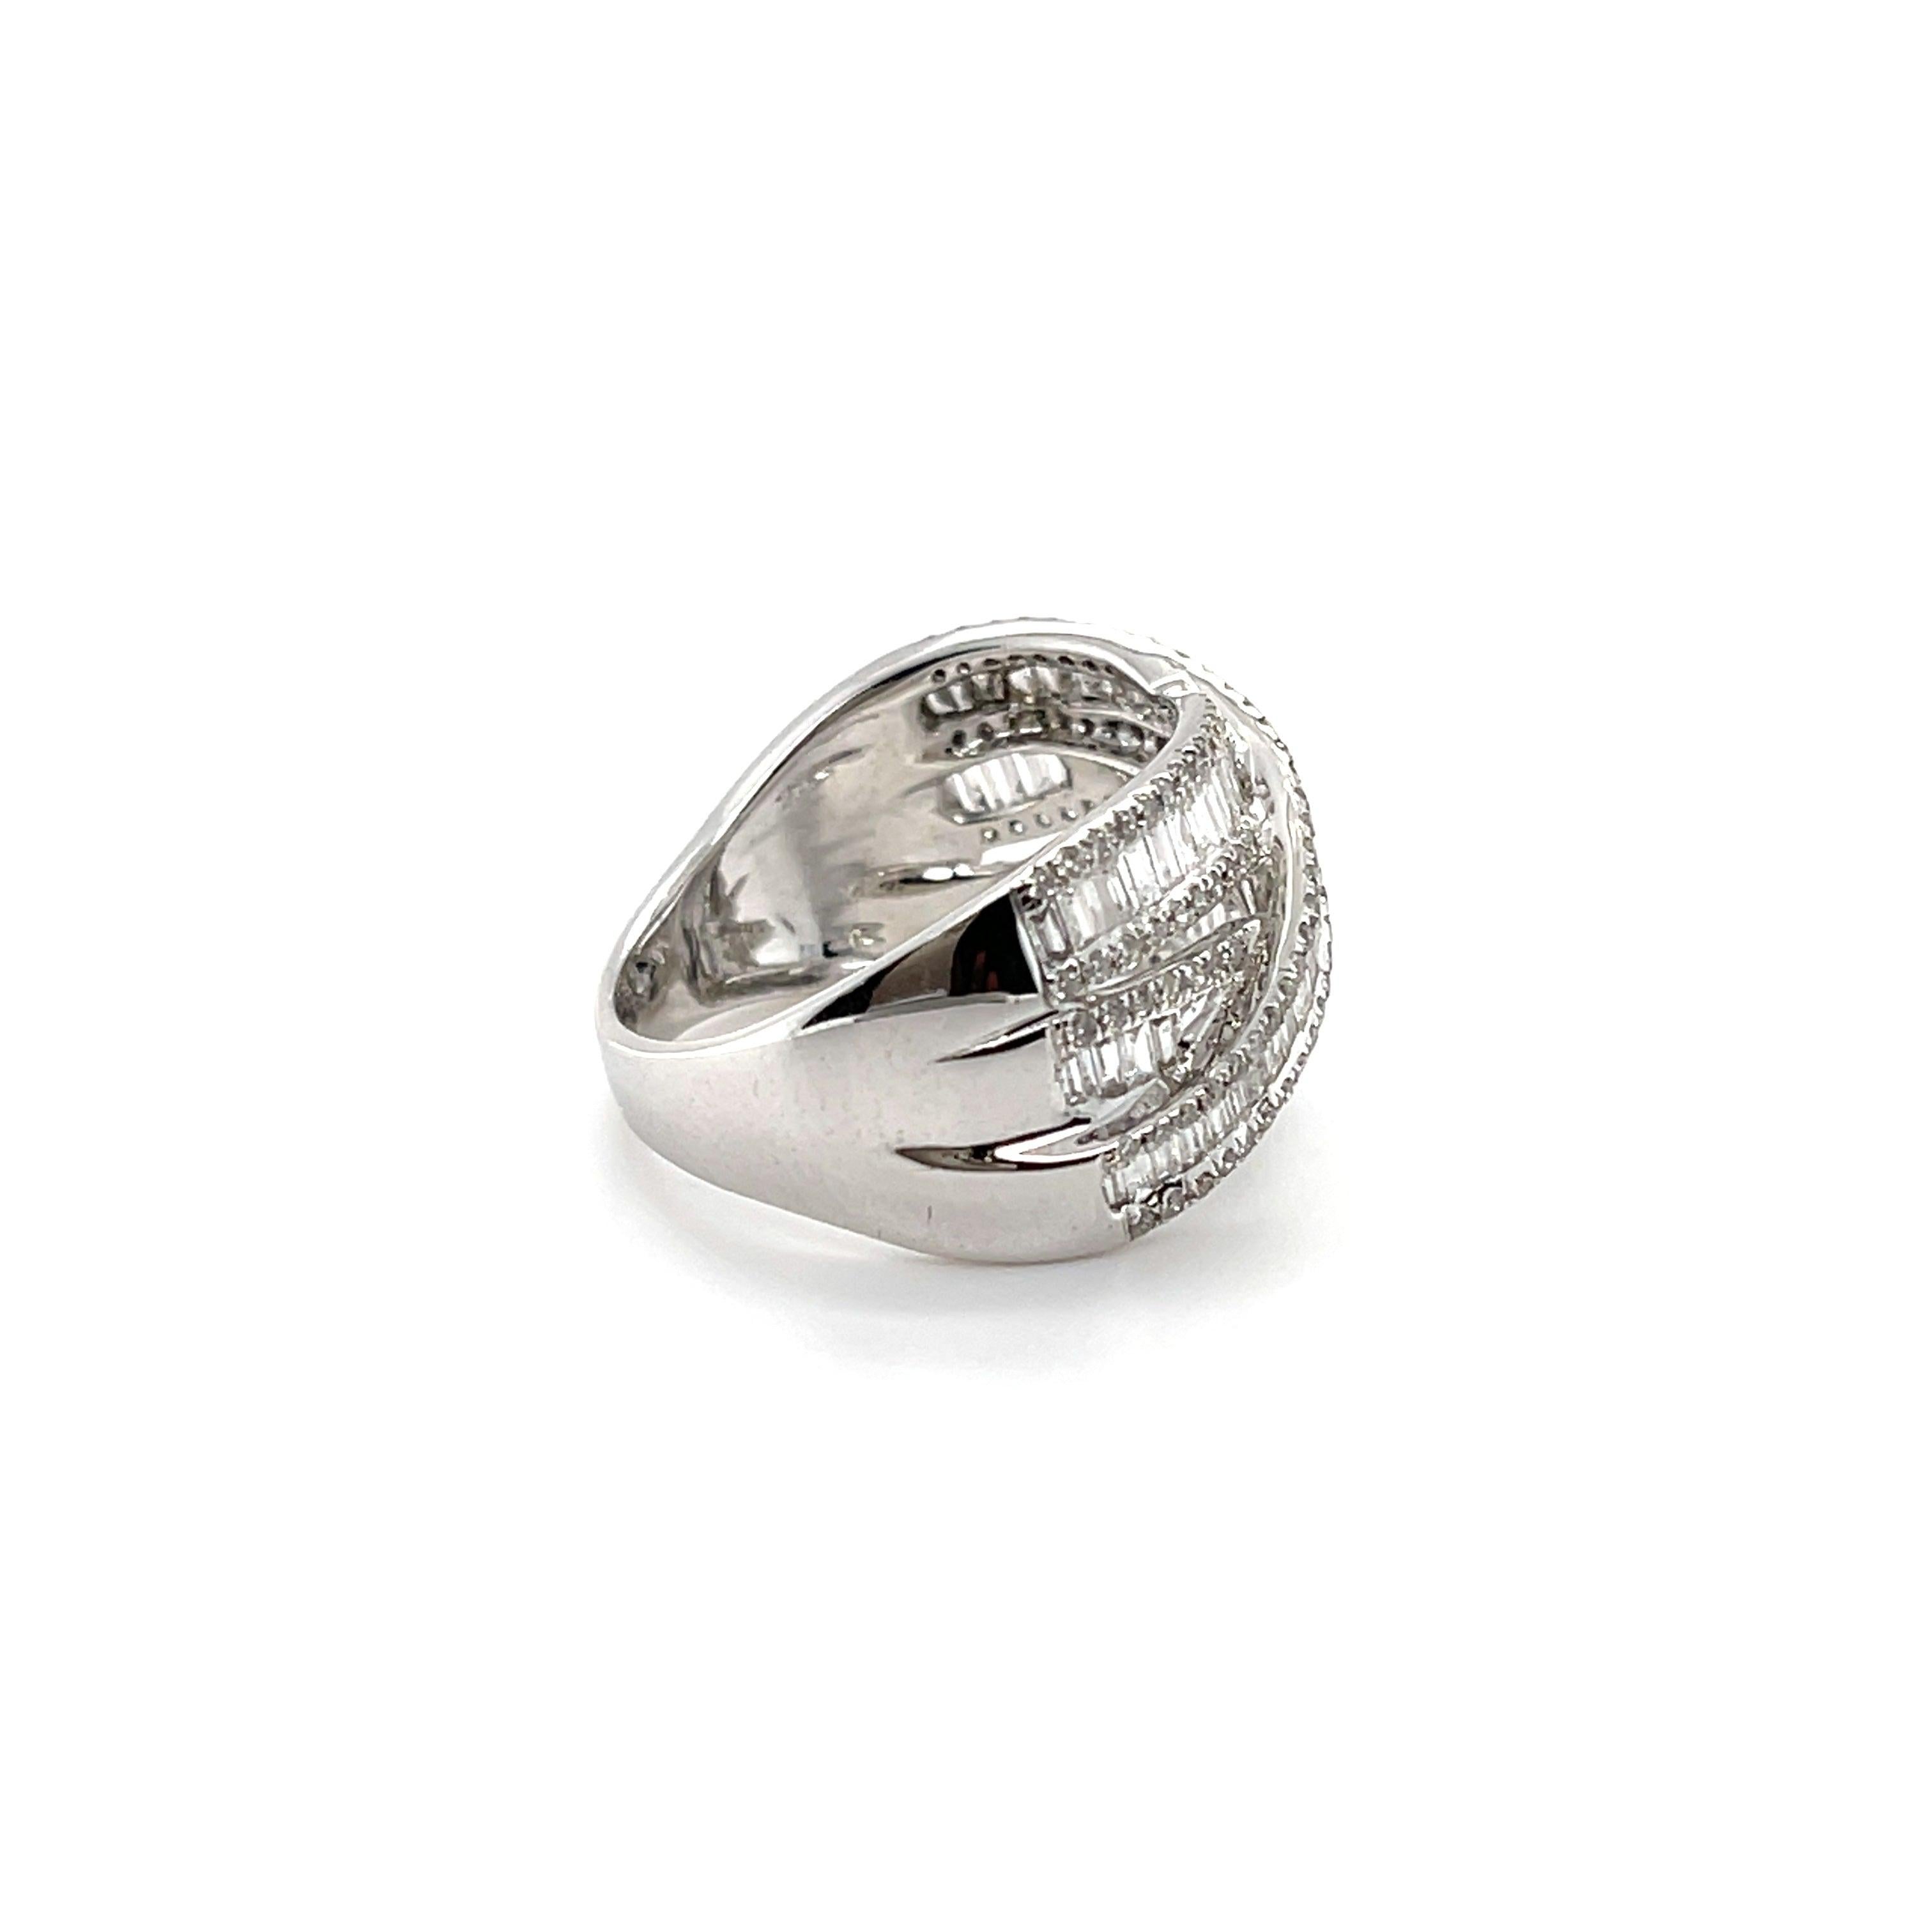 Diamonds, crafted with eighteen karat white gold, complemented by a polished finish design. 

130 Round diamond weight: 0.55CT 

74 Tapered diamond weight: 0.66CT 

Item weight: 5.28G

18KWG 
